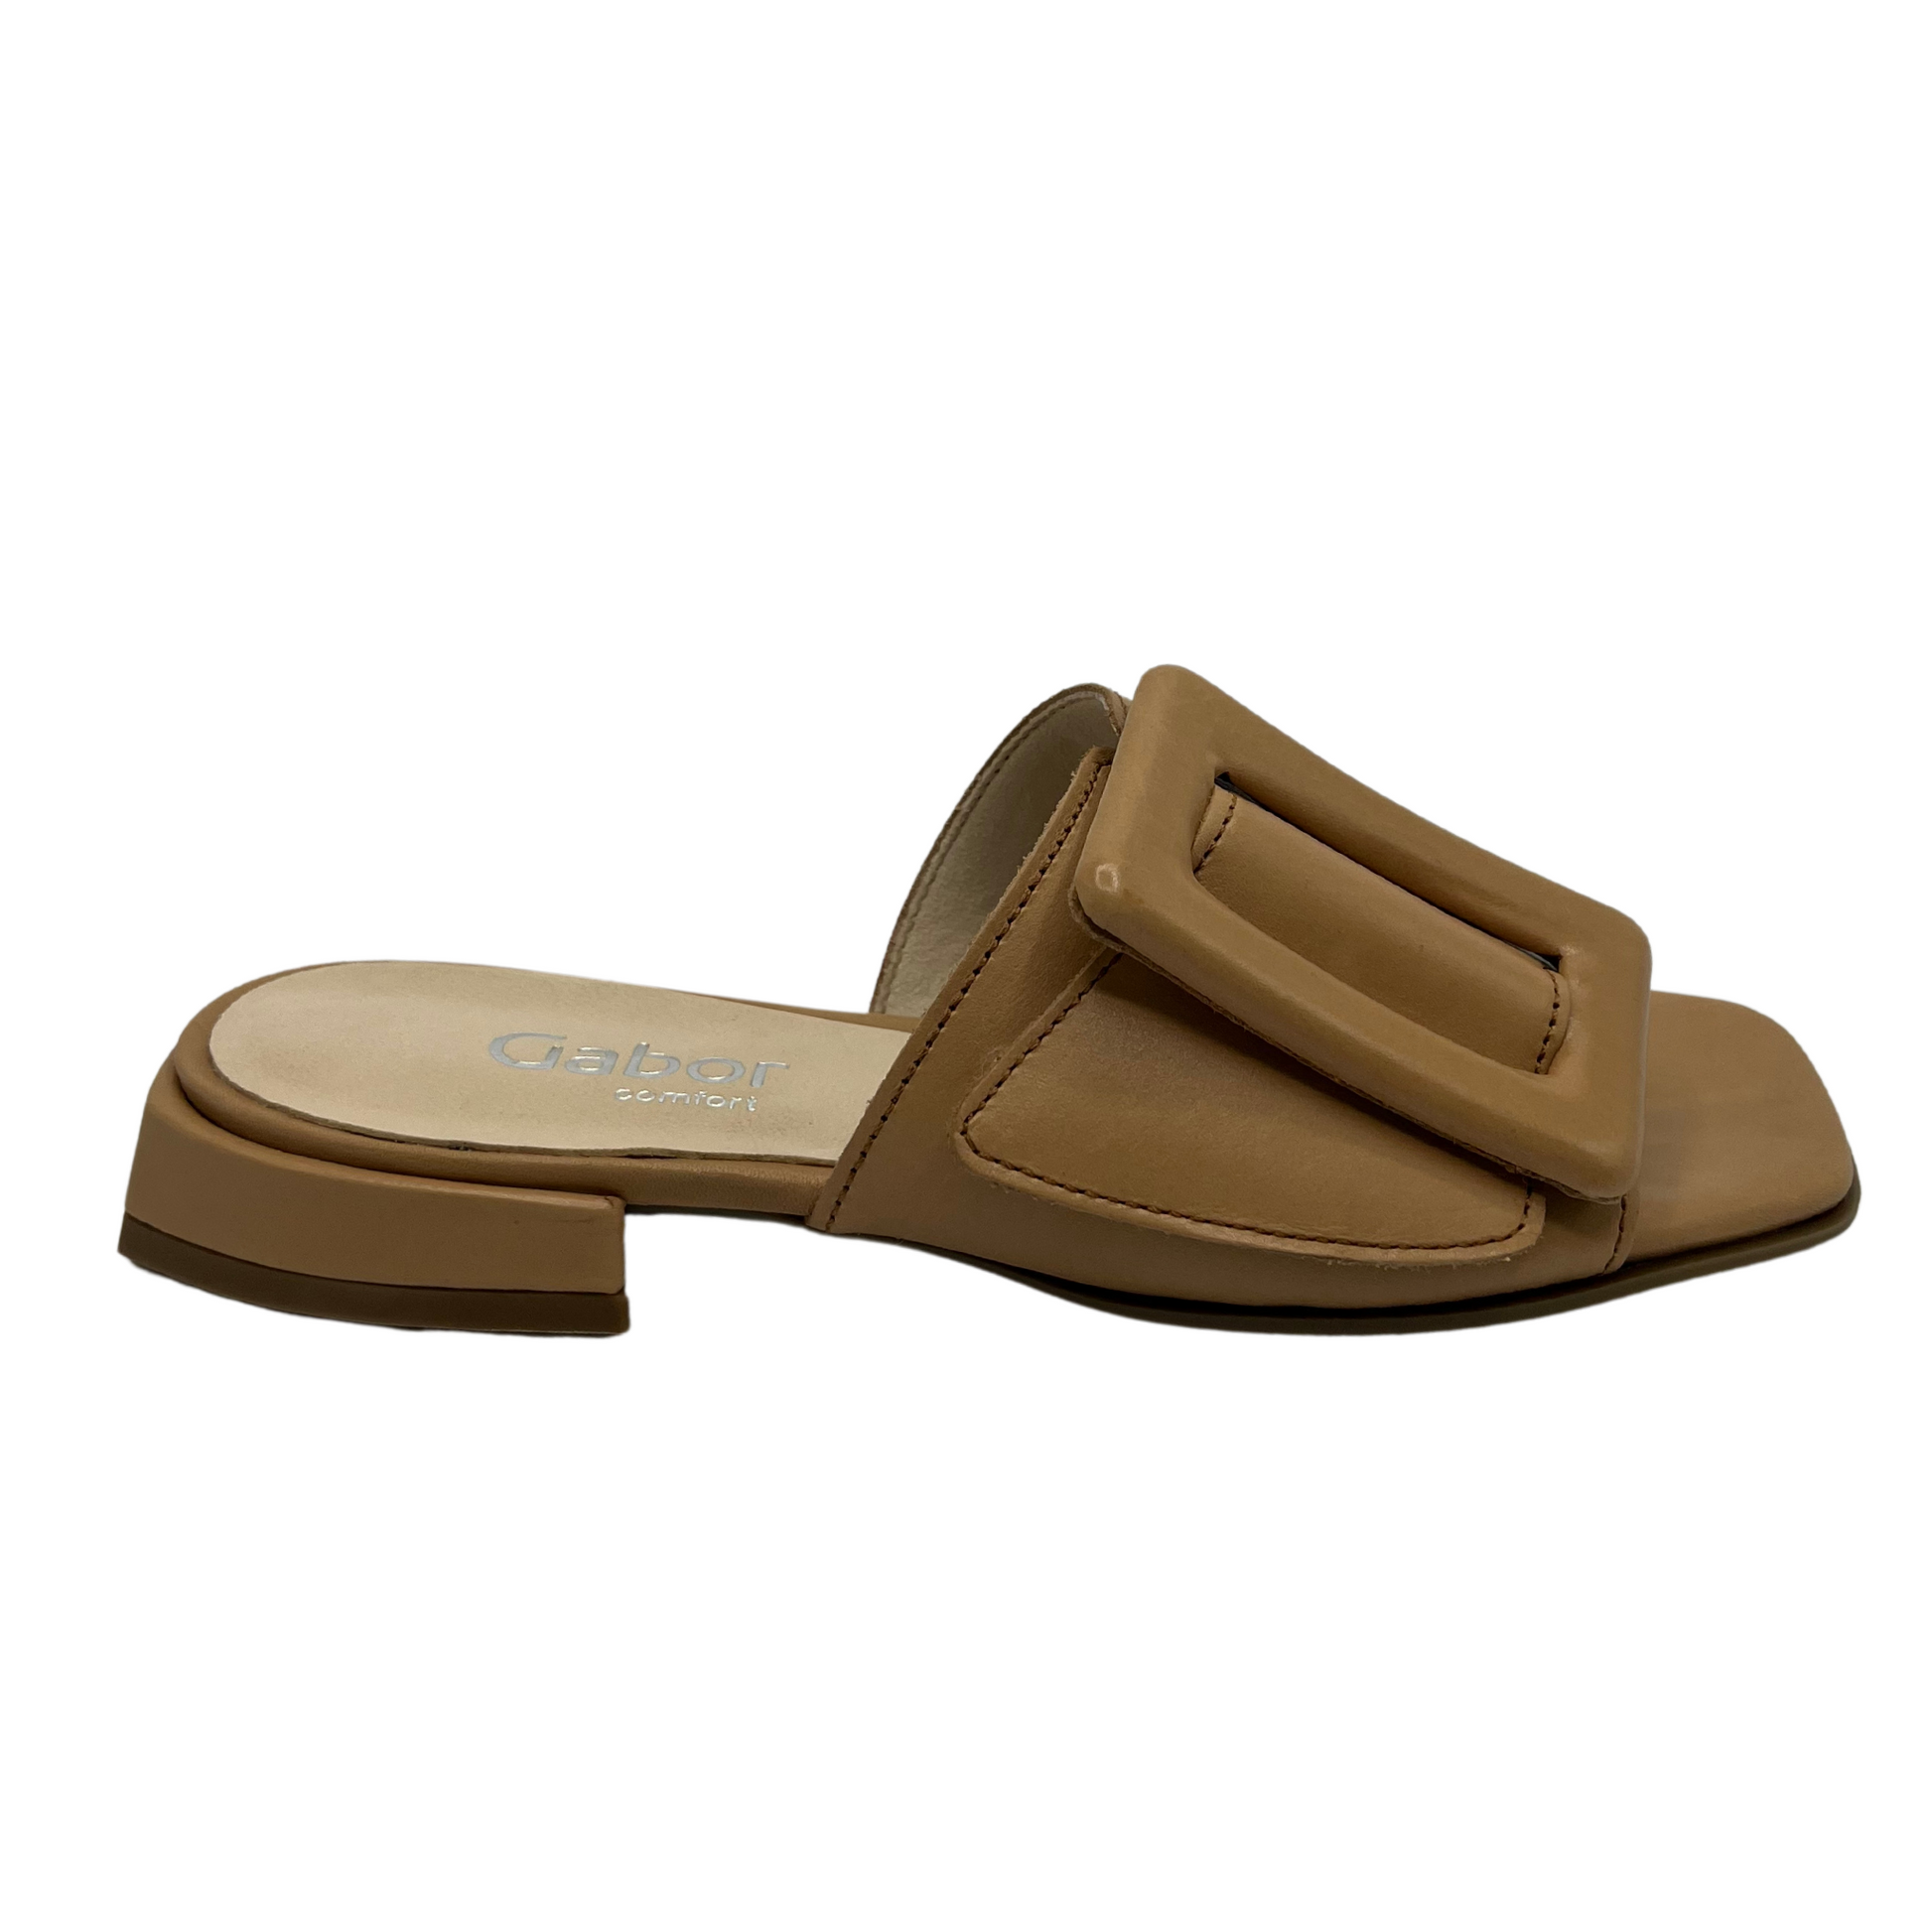 Right facing view of brown leather slip on sandals with a low wrapped heel and an oversized buckle detail on strap